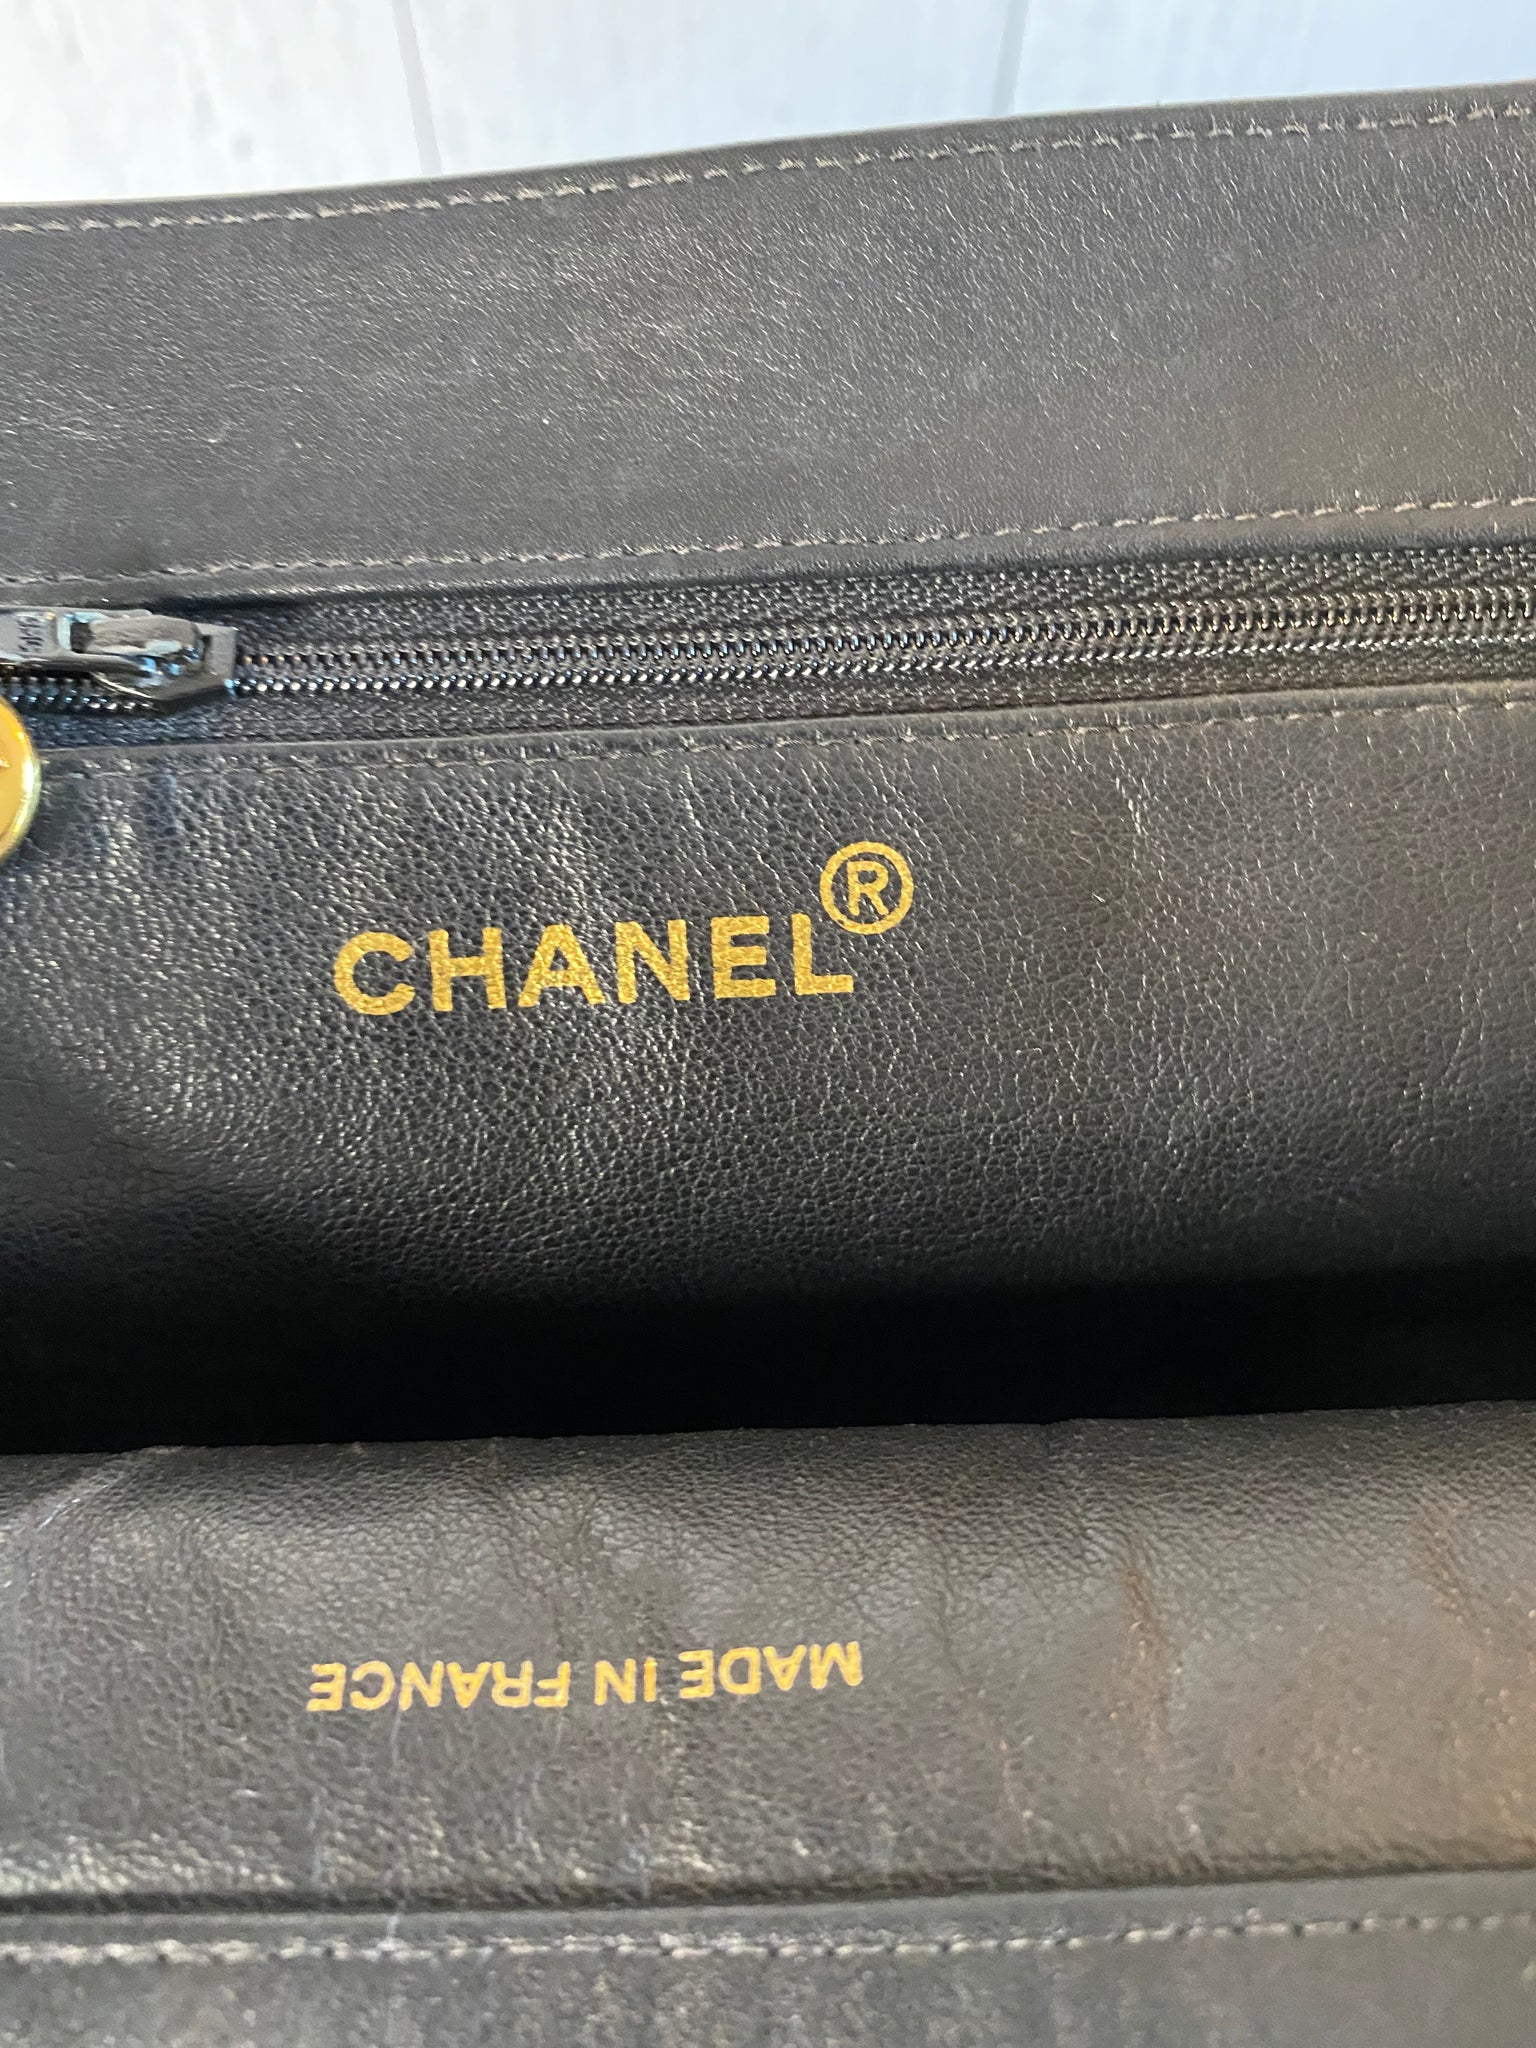 CHANEL Lambskin Large Shopping Chain Tote Black 723603